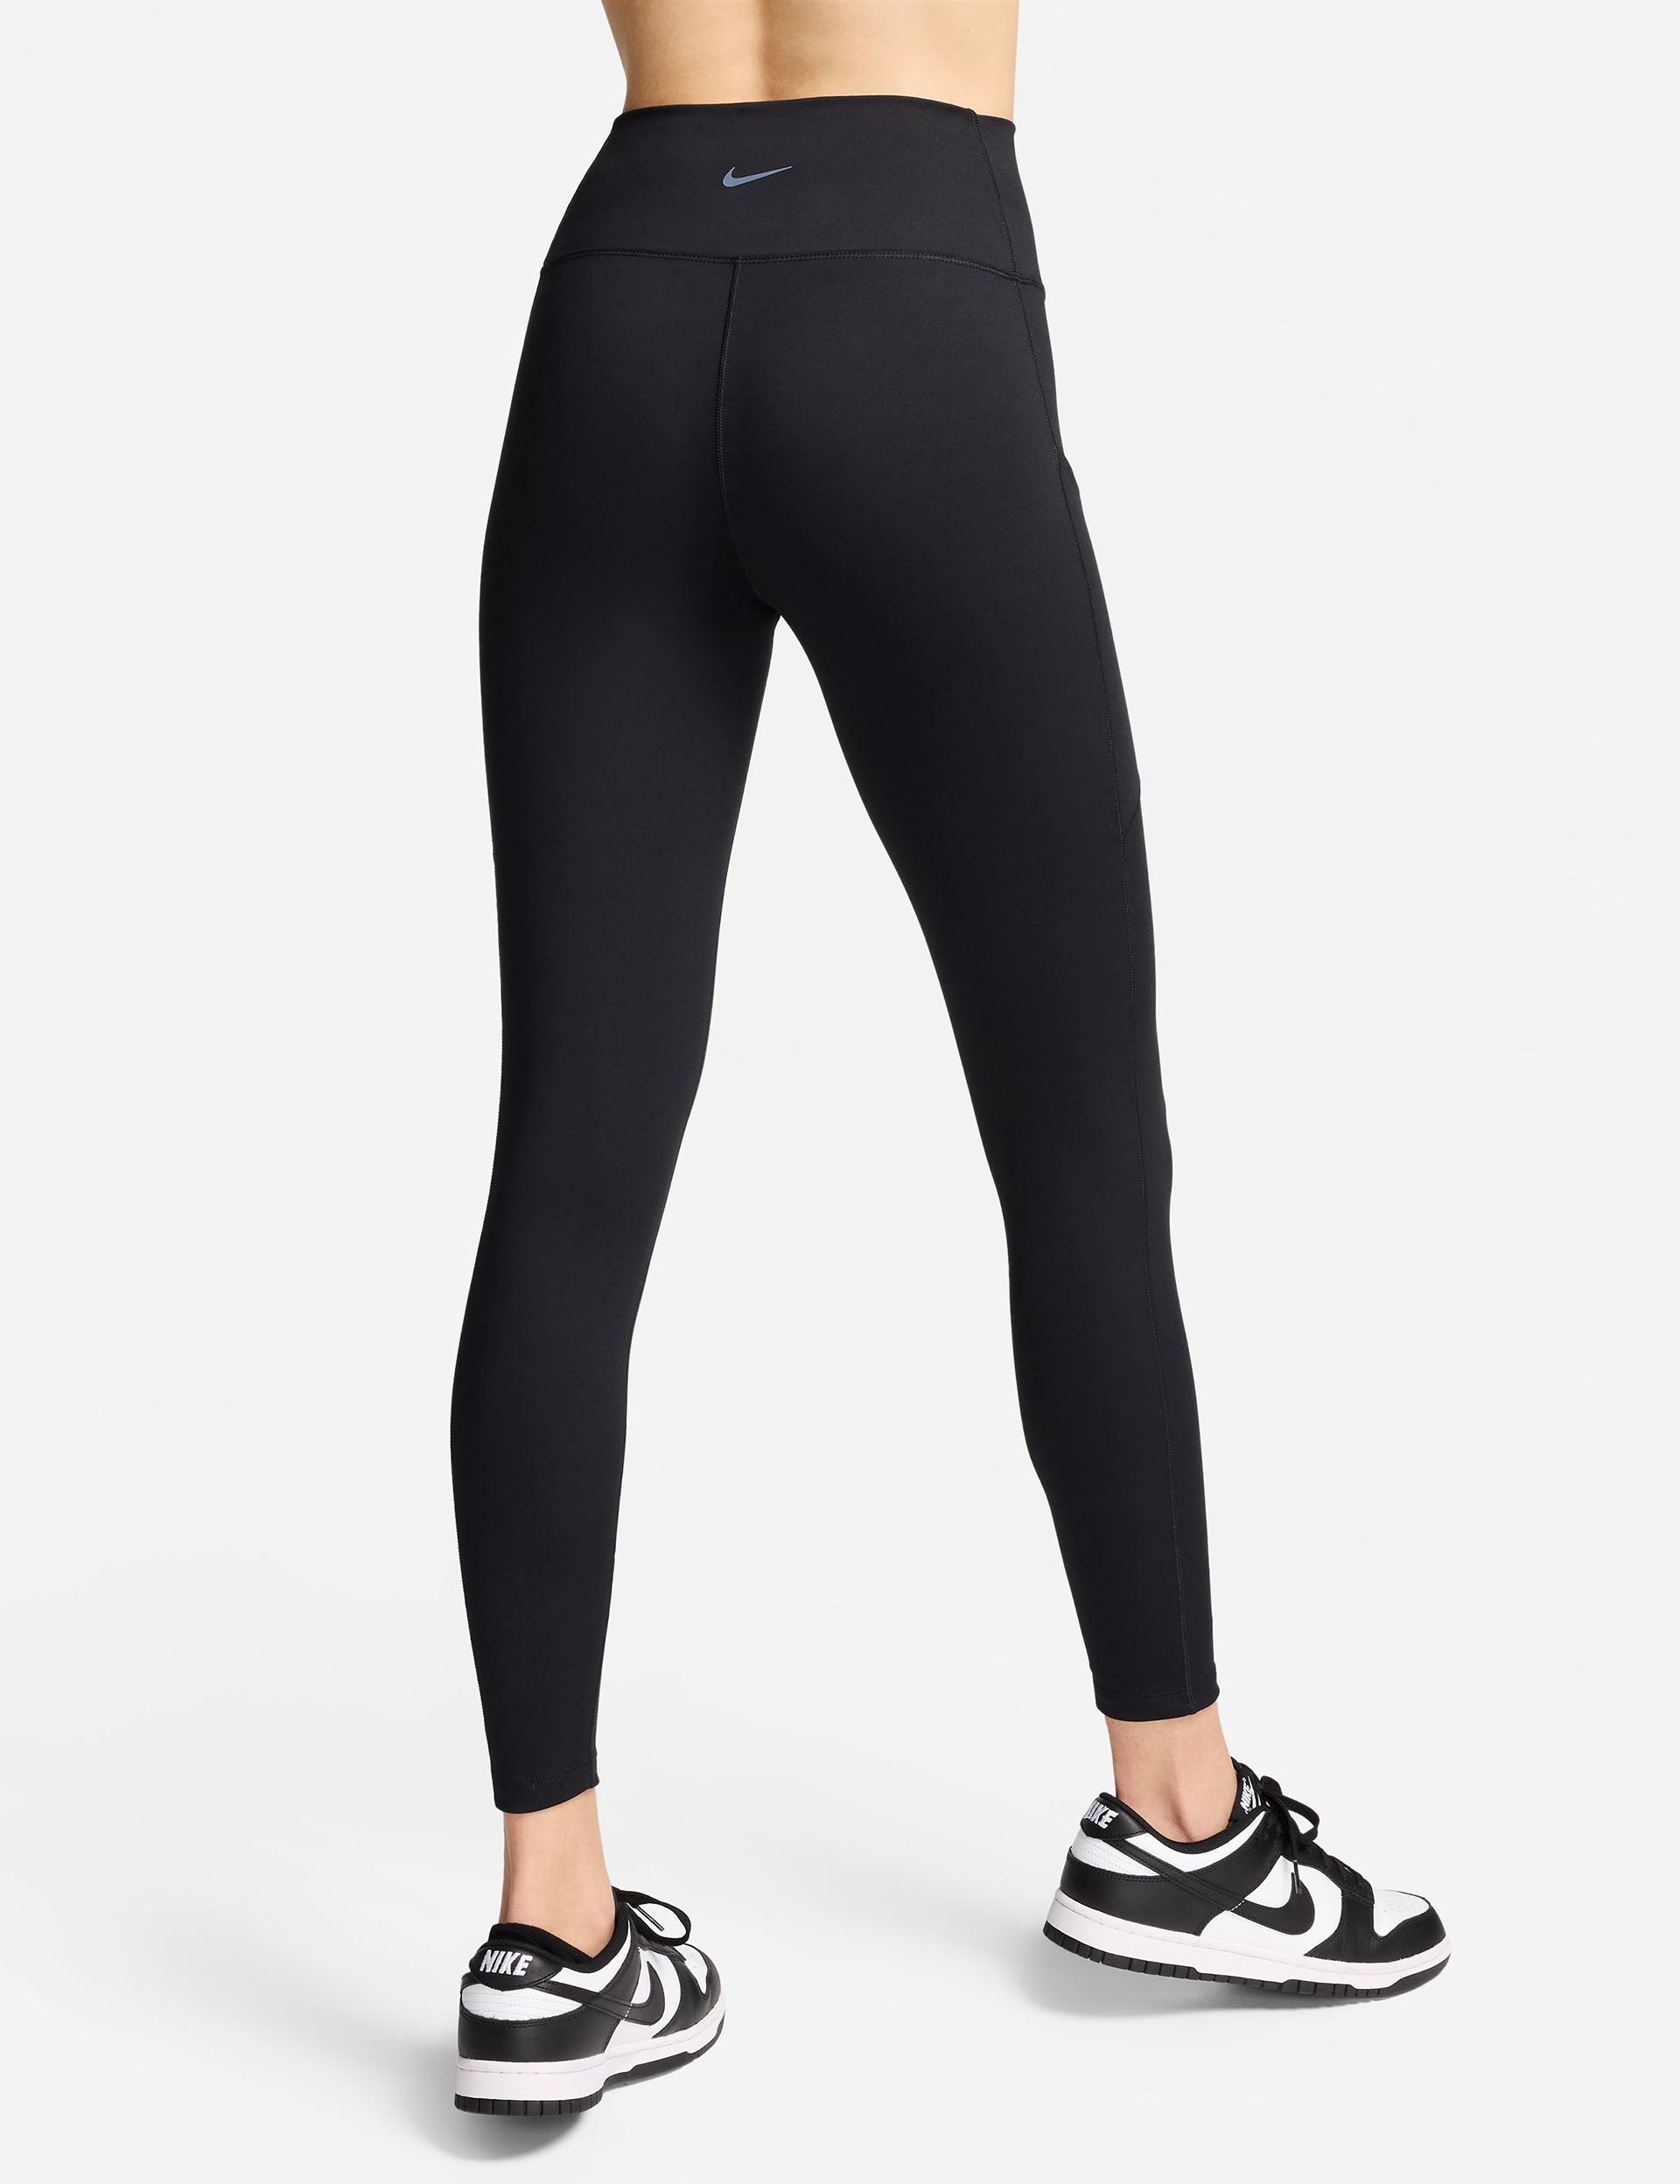 Running Bare Pocket 7/8 Leggings. Womens 7/8 Tights with Pockets